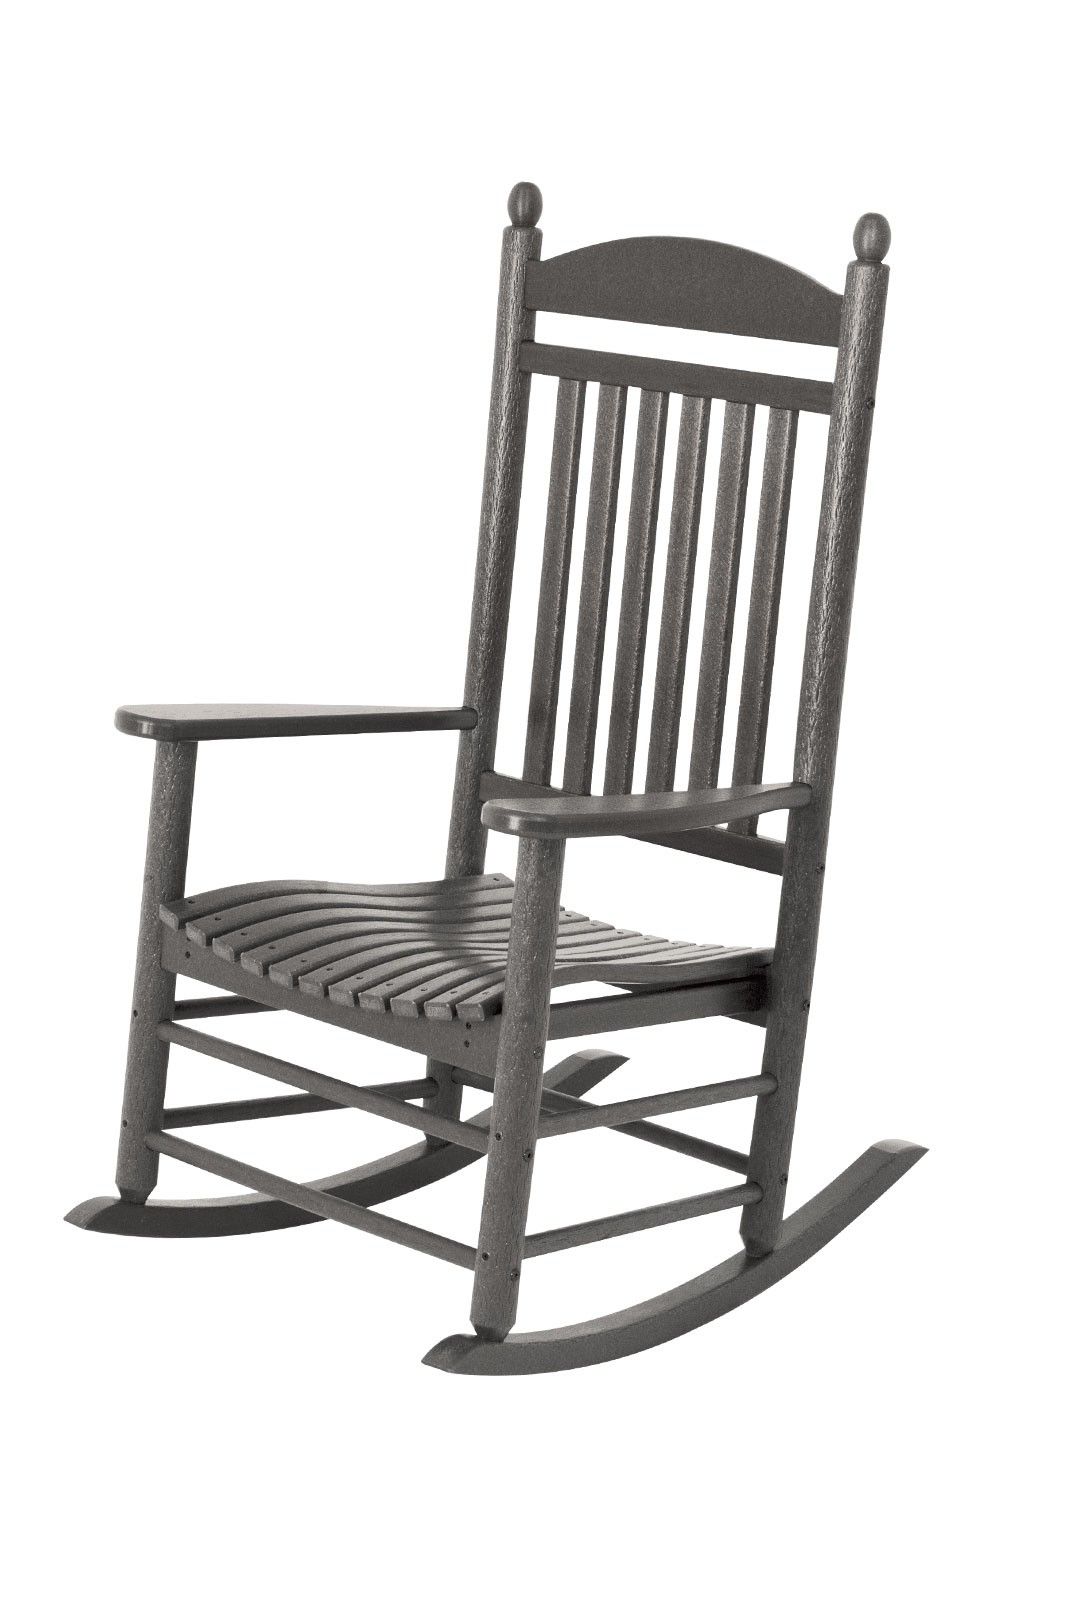 Polywood Jefferson Rocker Recycled Plastic Within Black Plastic Rocking Chairs (View 18 of 20)